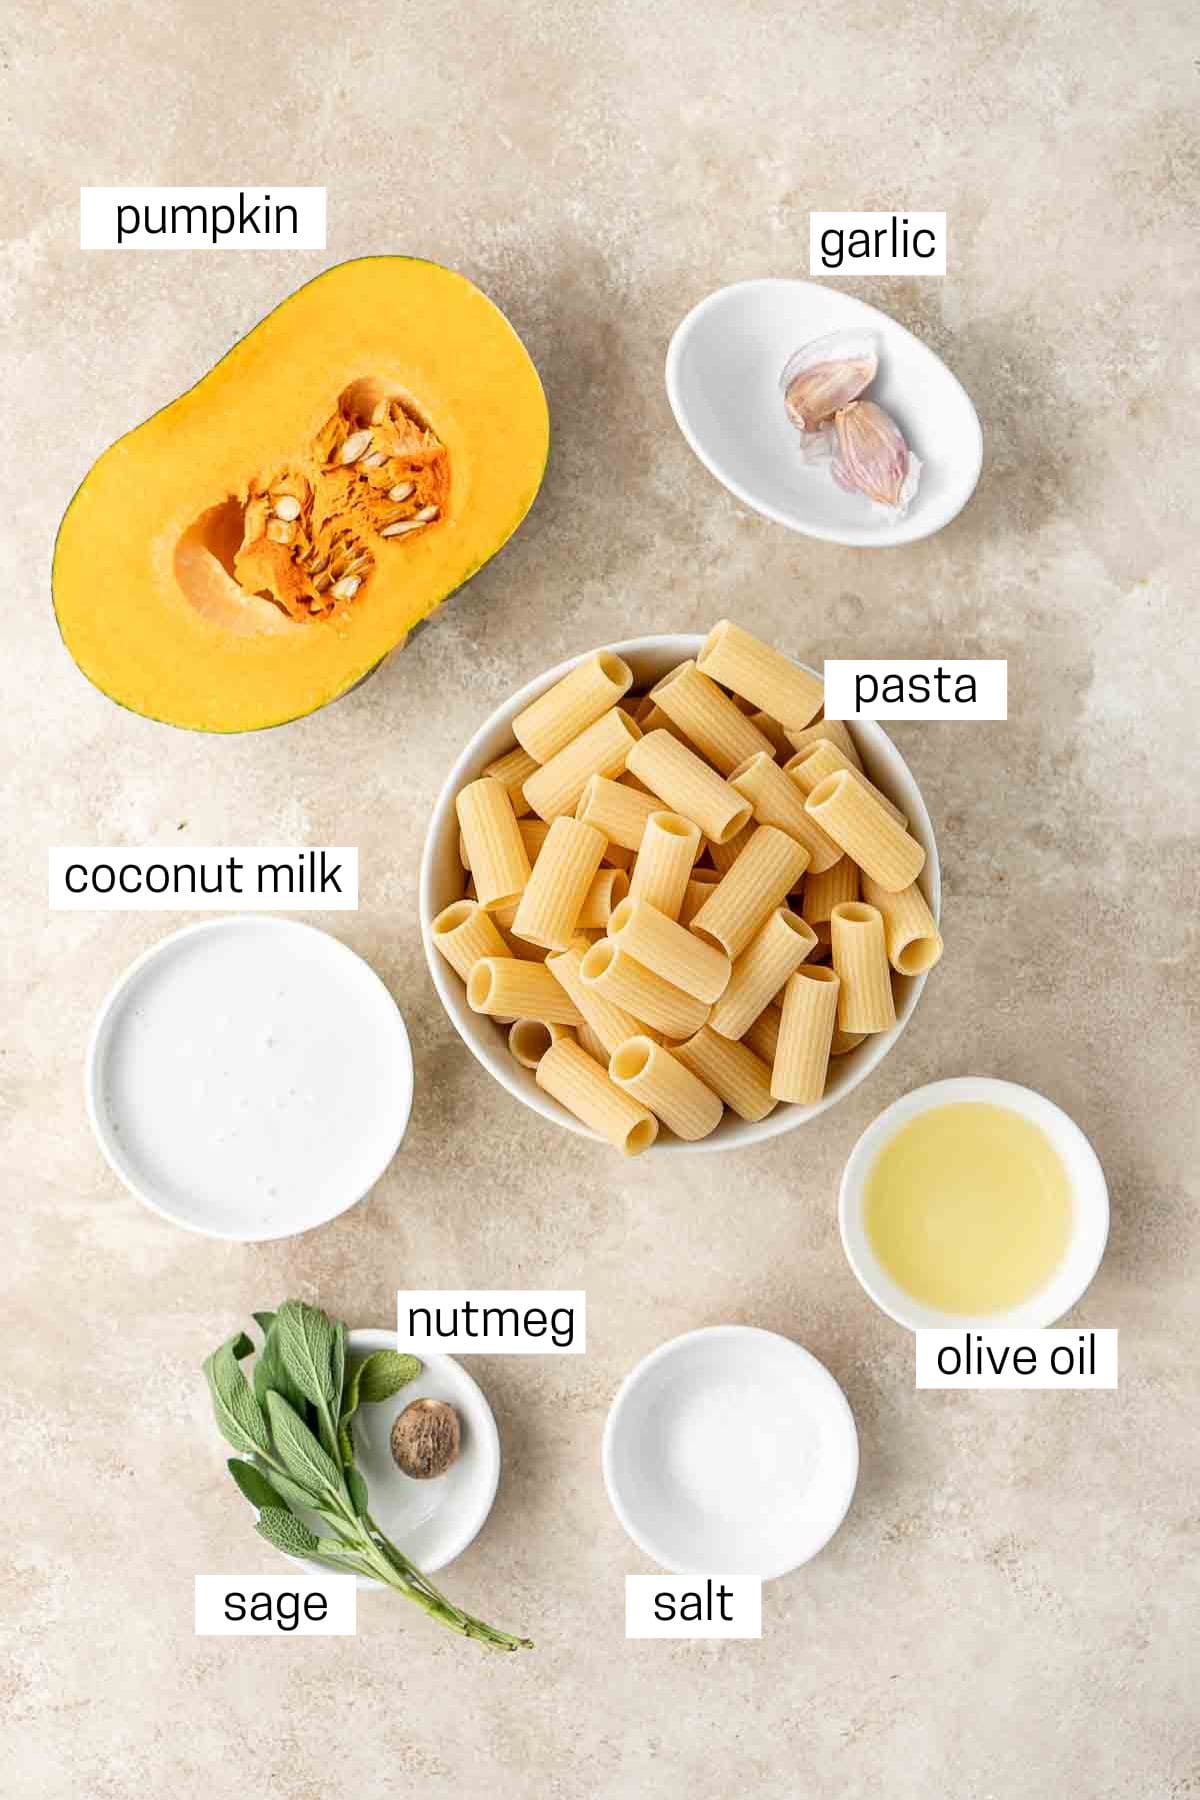 All ingredients needed to make creamy vegan pumpkin pasta laid out in small bowls.